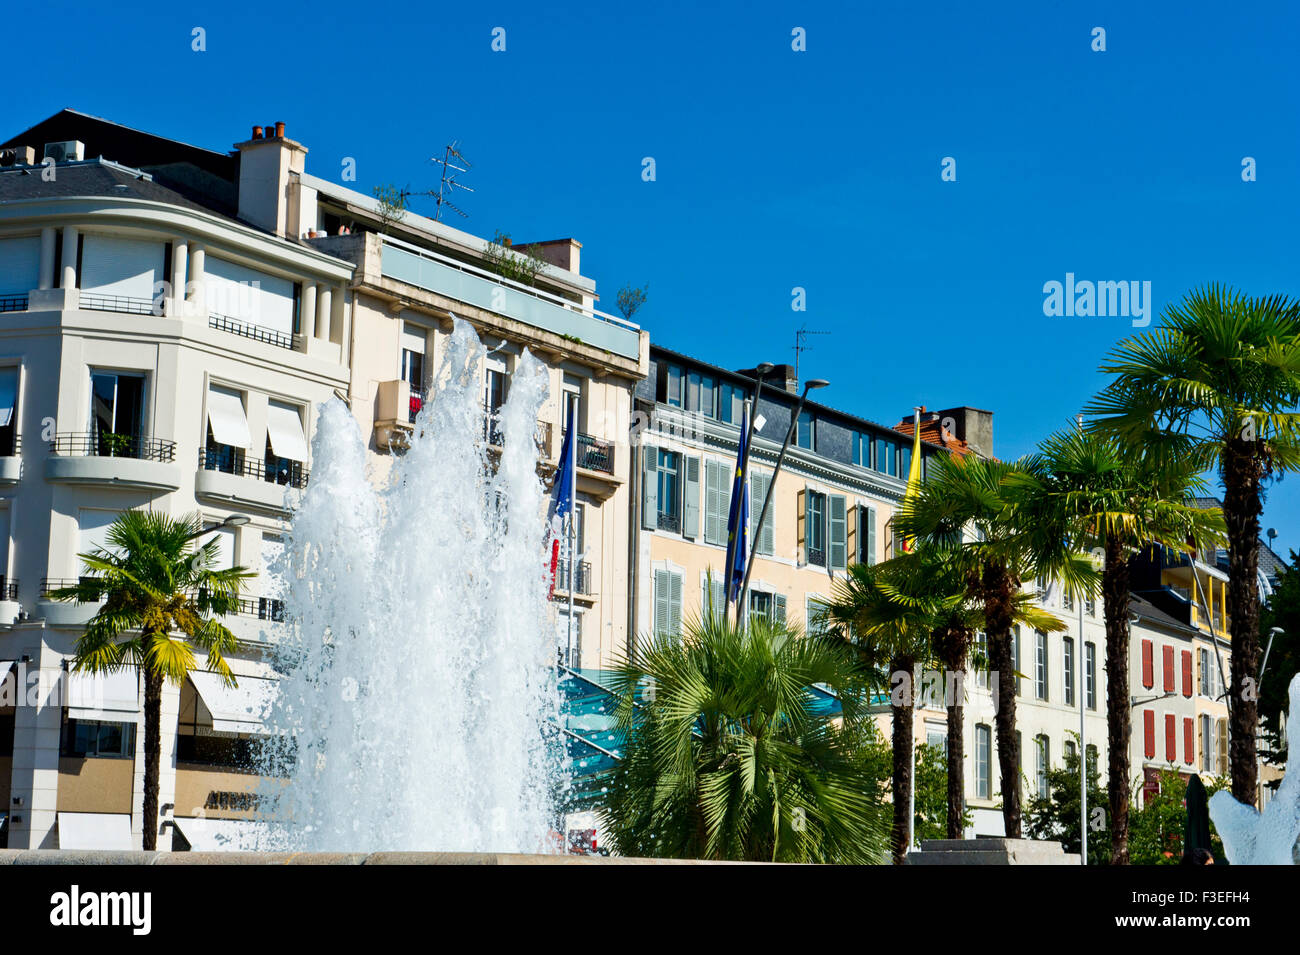 Fountain in Place Clemenceau, Pau, Pyrenees Atlantiques, France Stock Photo